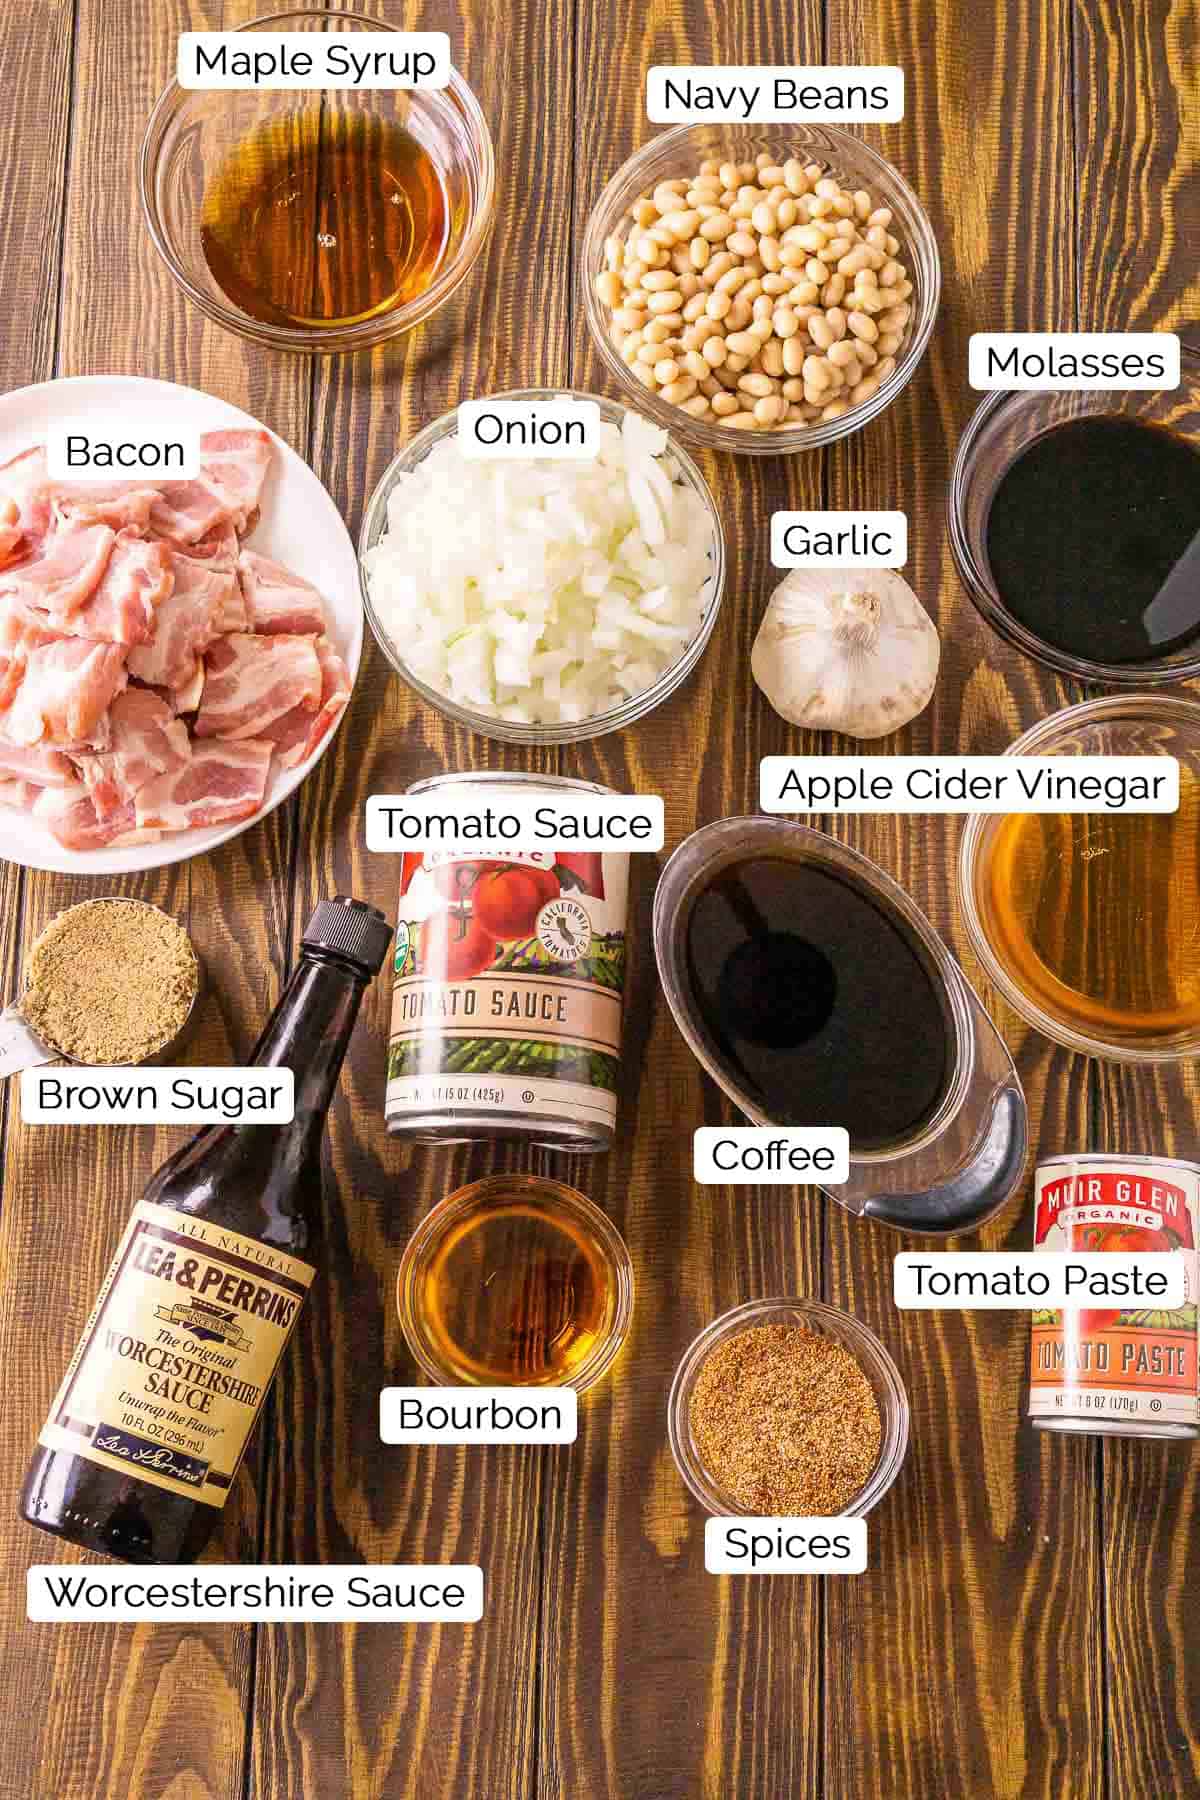 The ingredients on a wooden board with black and white labels identifying each item.